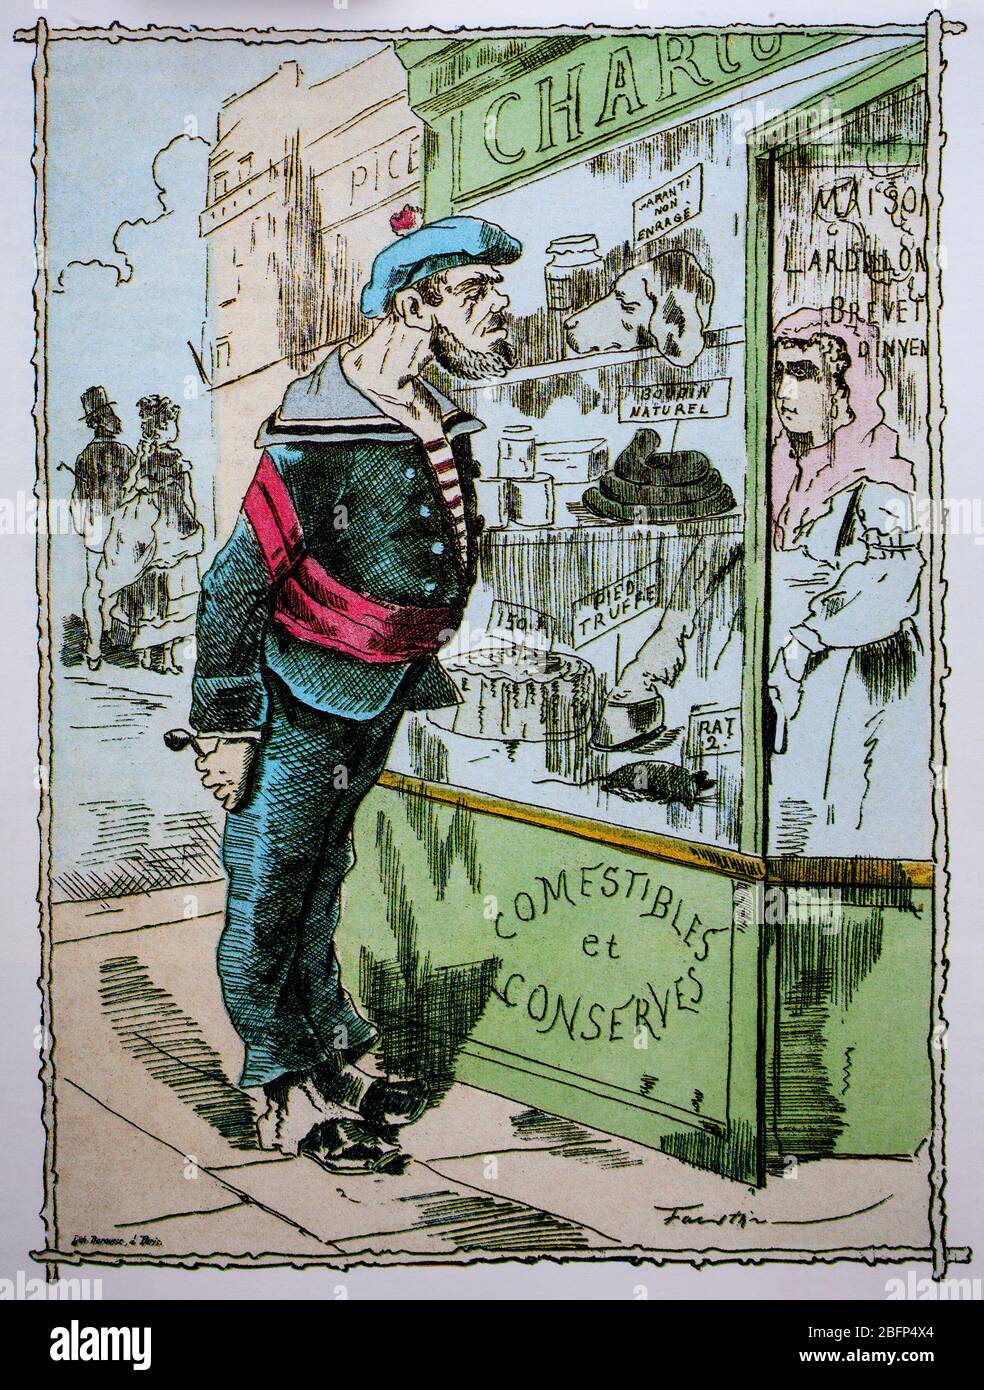 A French sailor examines the strange variety of meat available in a butcher's shop window during the Paris Siege.  After defeat at the Battle of the Sedan, where French emperor Napoleon III surrendered, the new French Third Republic was not ready to accept German peace terms. In order to end the Franco-Prussian War, the Germans besieged Paris beginning on 19 September 1870. Stock Photo